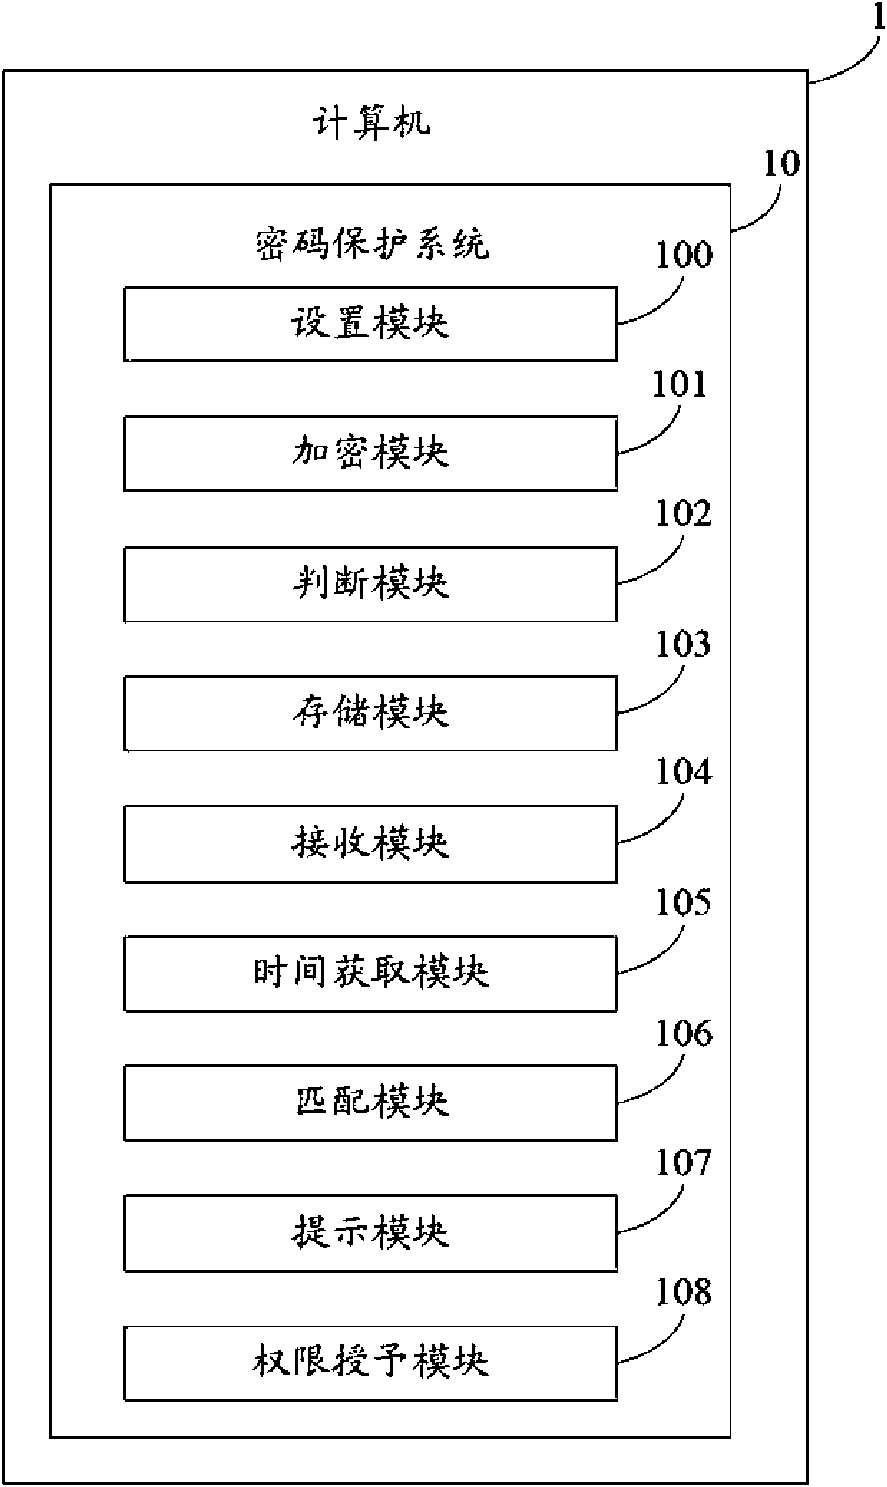 Password-protecting system and method